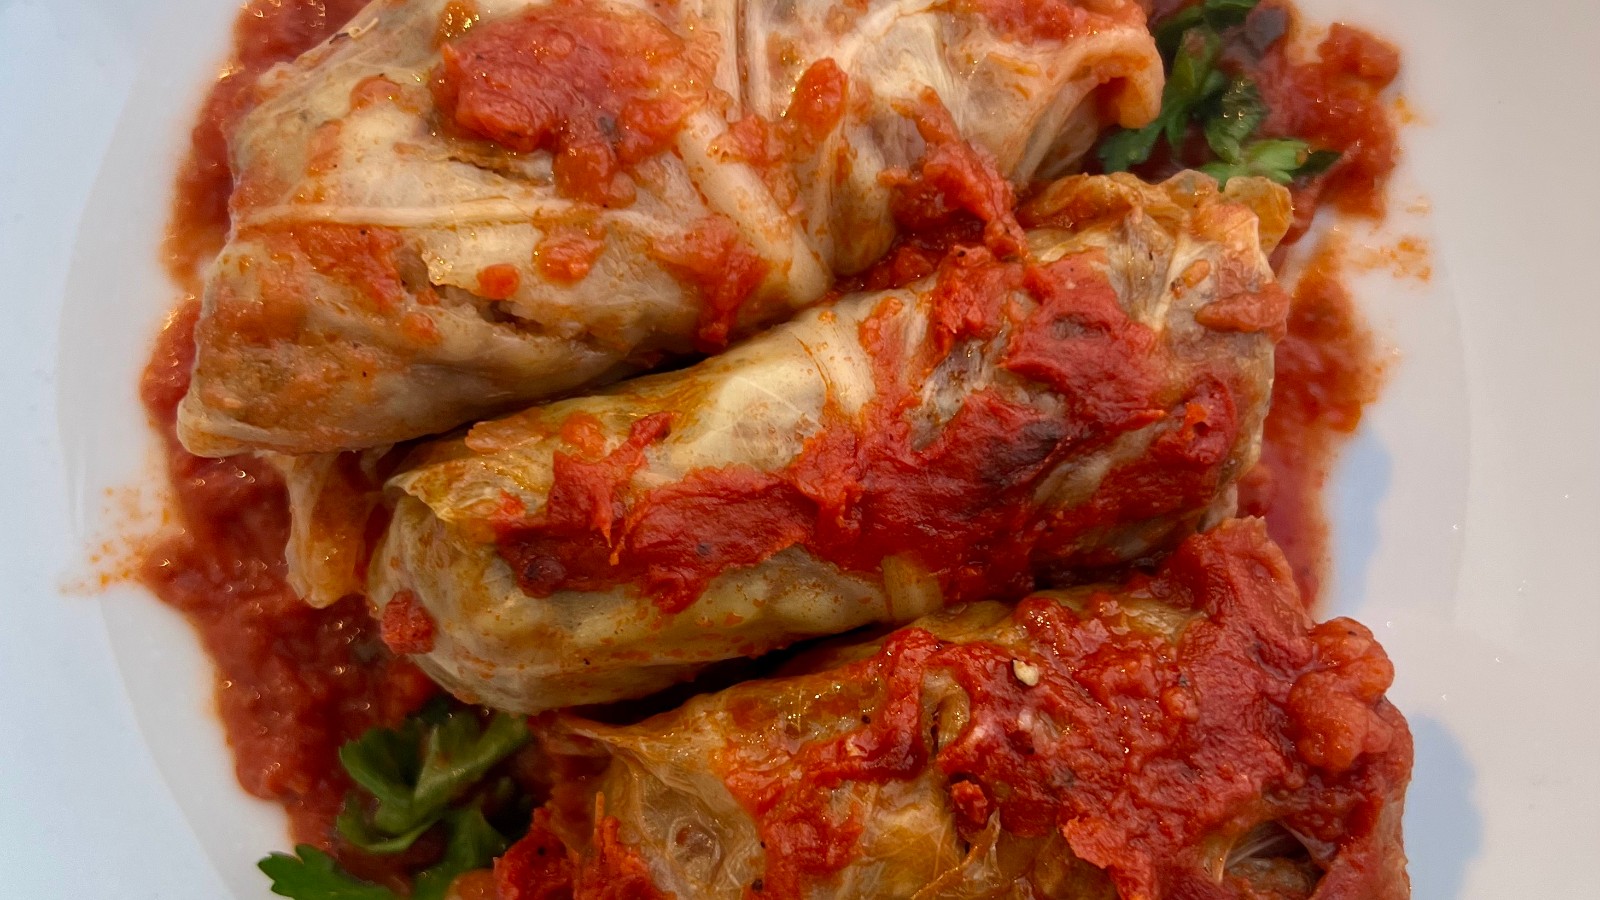 Image of Stuffed Cabbage Rolls (or casserole)